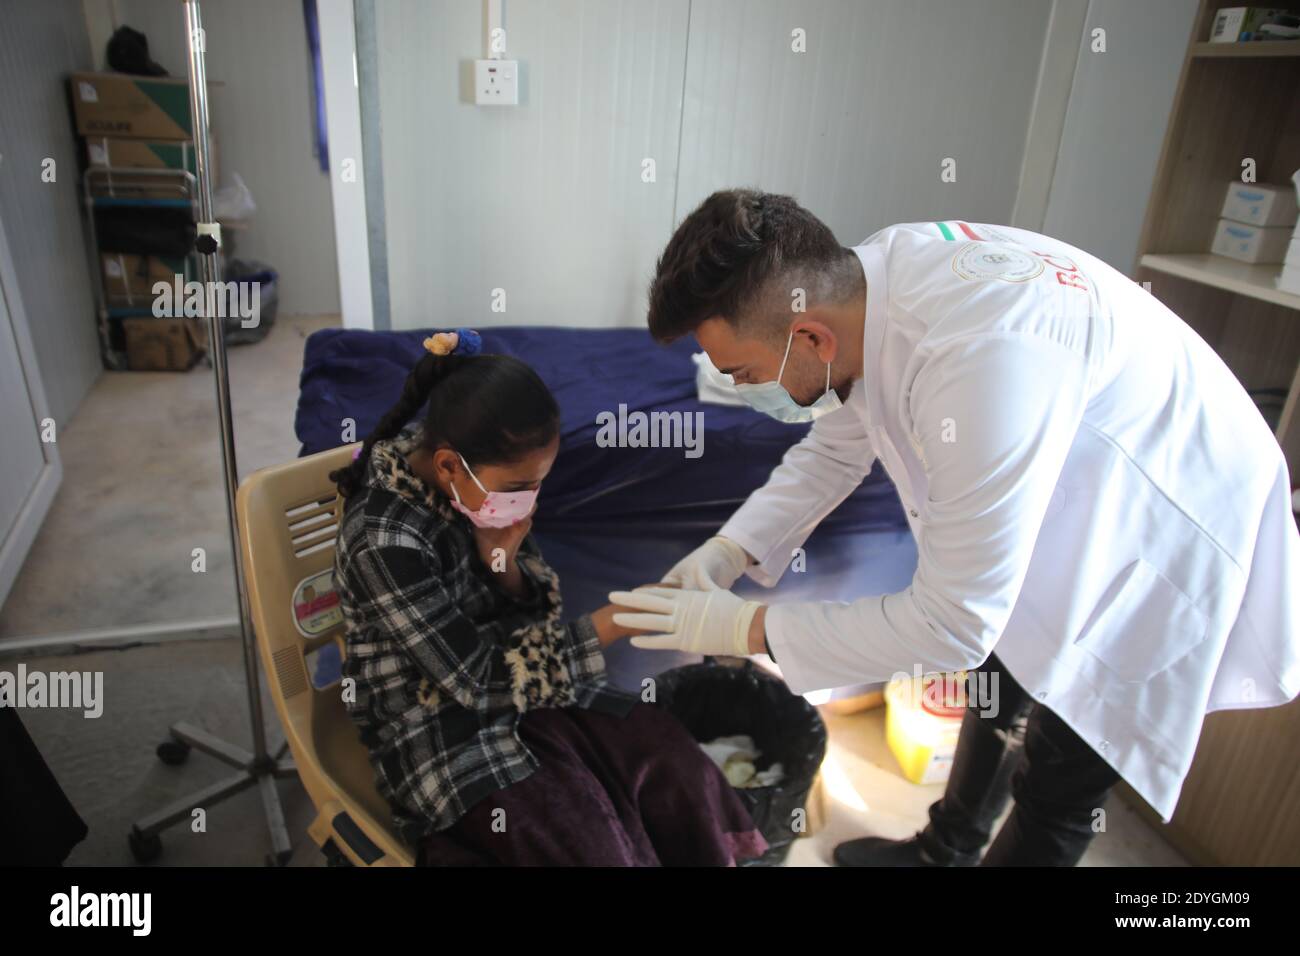 Baghdad. 26th Dec, 2020. A girl receives medical treatment at the primary health center in Hasansham U3 Camp in Nineveh province, Iraq, Dec. 8, 2020. The ongoing COVID-19 pandemic has raised vulnerability levels of Internal Displaced People (IDP) in Iraq. Aid agencies can't do as much to help, and containing the contagious virus in camps is becoming more difficult. Credit: Xinhua/Alamy Live News Stock Photo